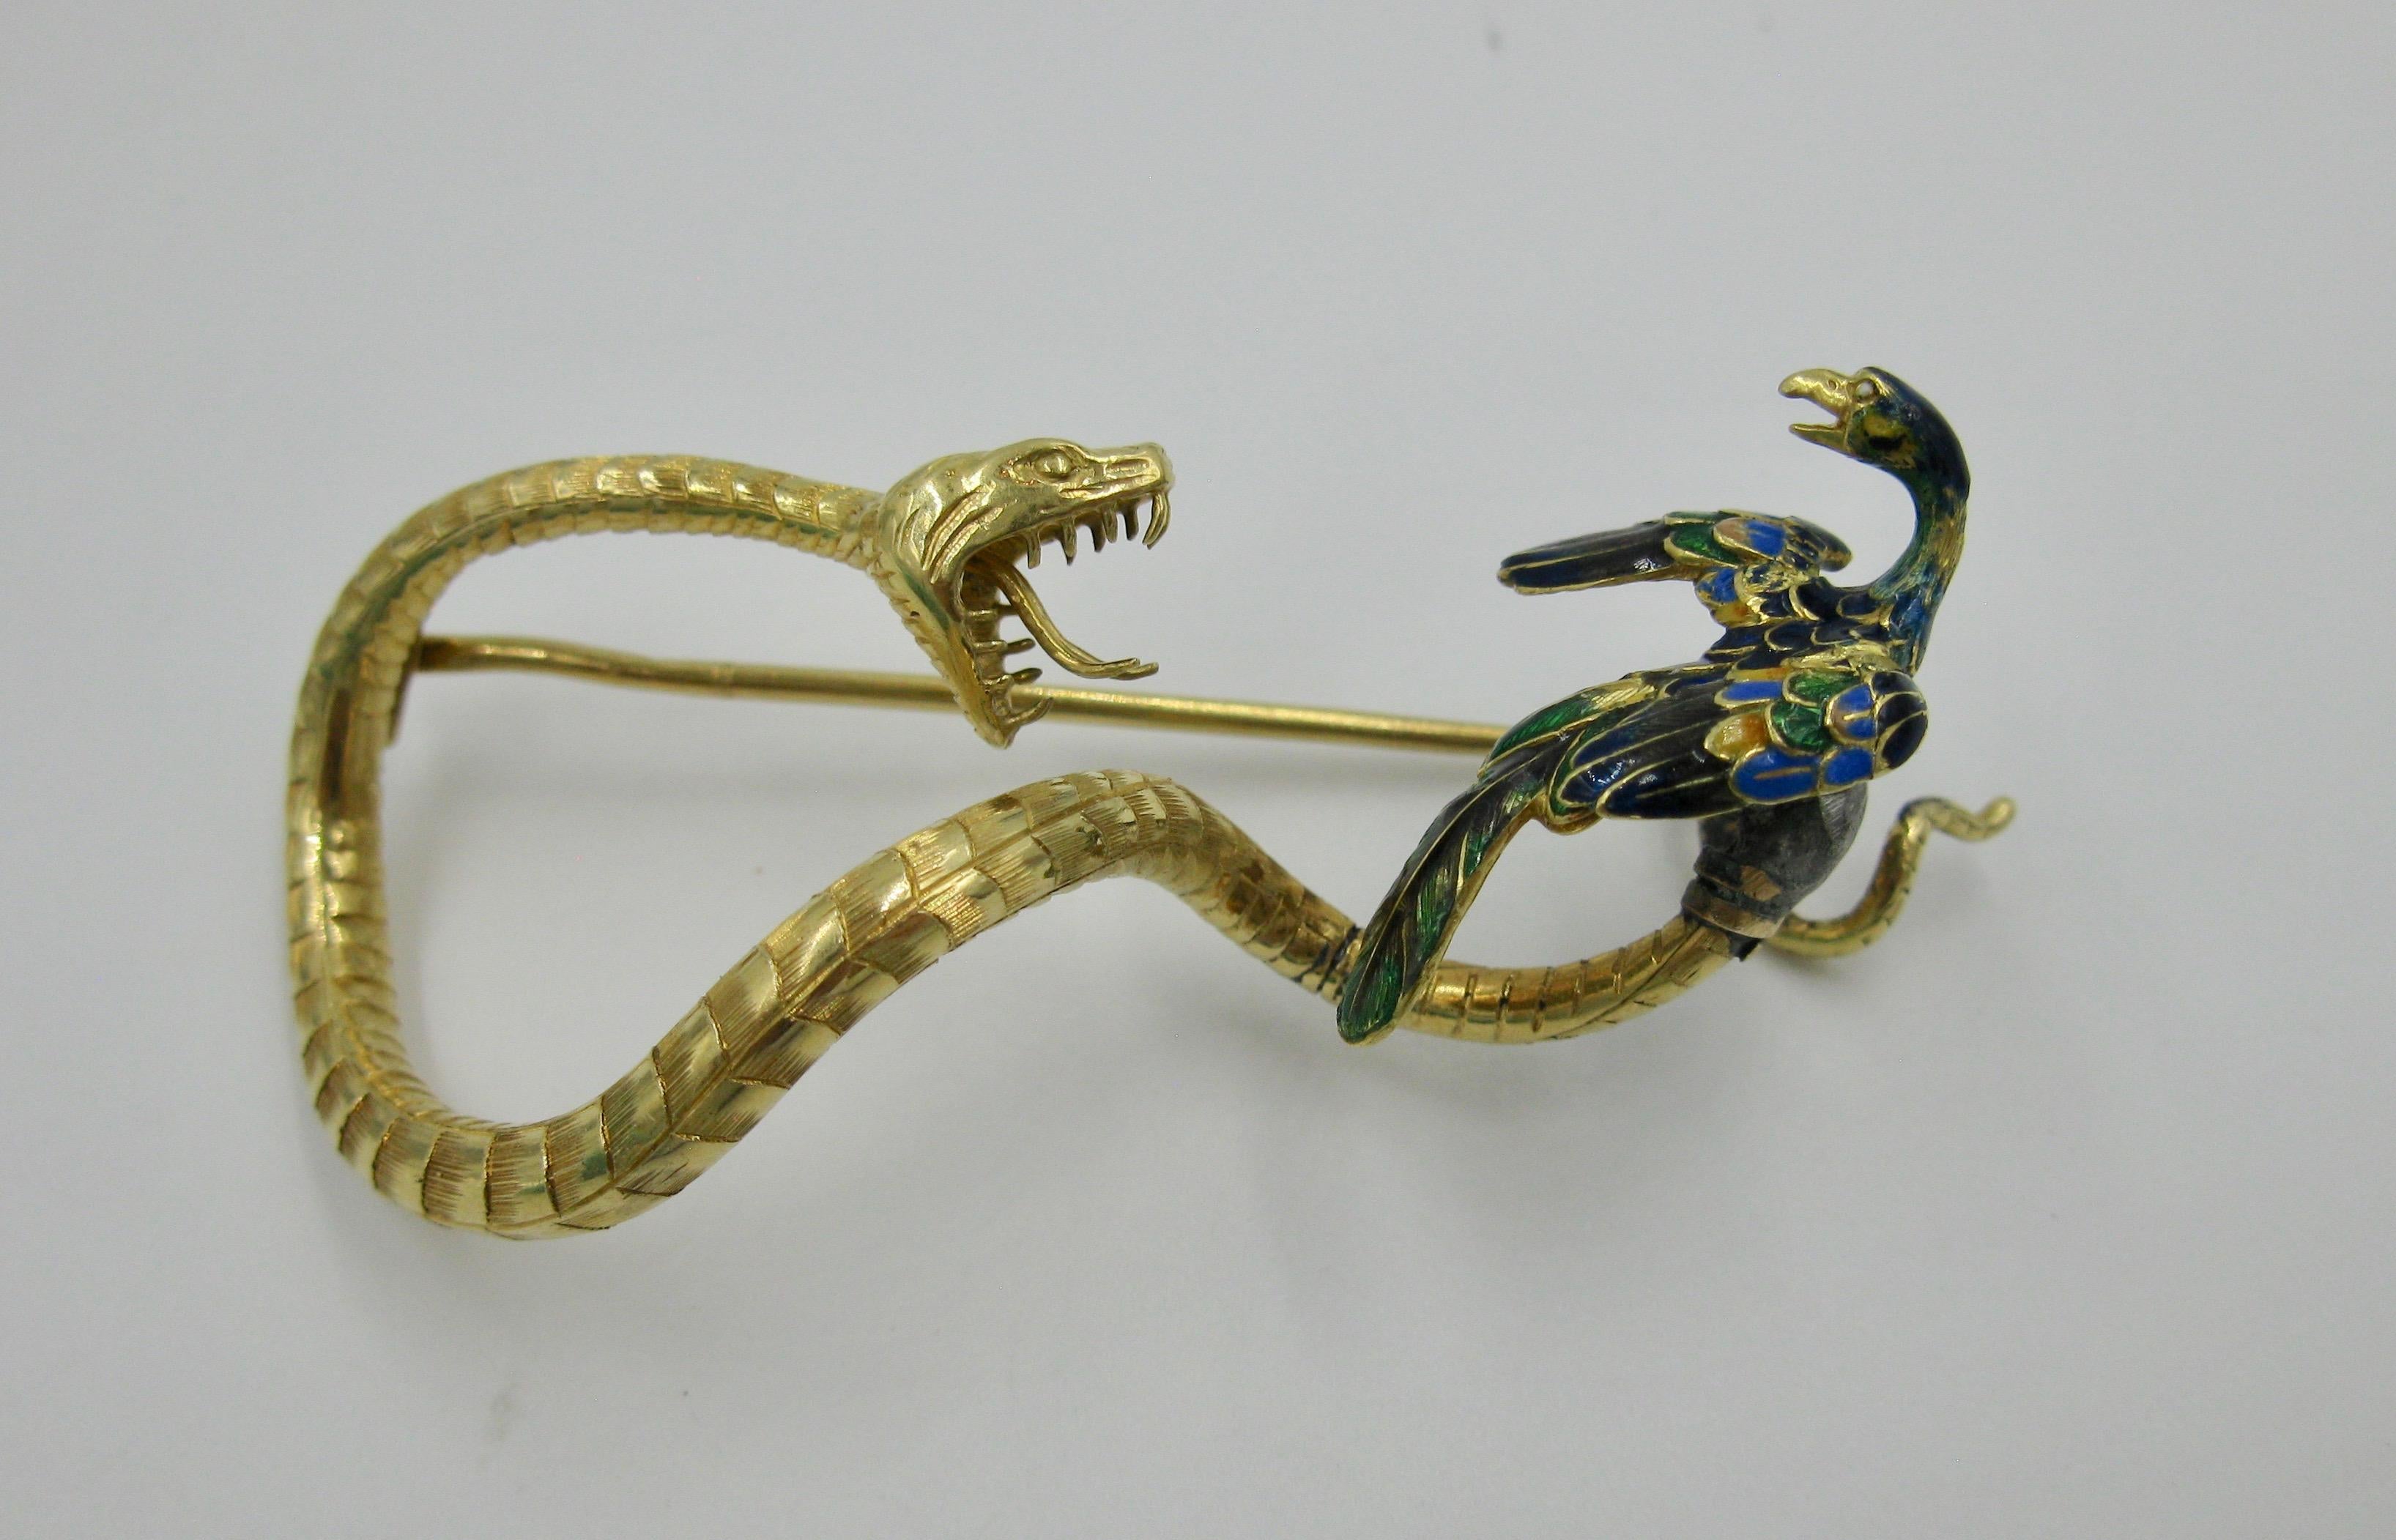 AN ABSOLUTELY STUNNING AND VERY RARE FRENCH ART NOUVEAU BROOCH OF AN OPEN MOUTH SNAKE AND A GORGEOUSLY ENAMELED PHOENIX BIRD.  THE BROOCH IN 18K YELLOW GOLD WITH MAGNIFICENT DETAILS AND MASTERFUL CRAFTSMANSHIP.  IT DATES TO THE FIRST QUARTER OF THE